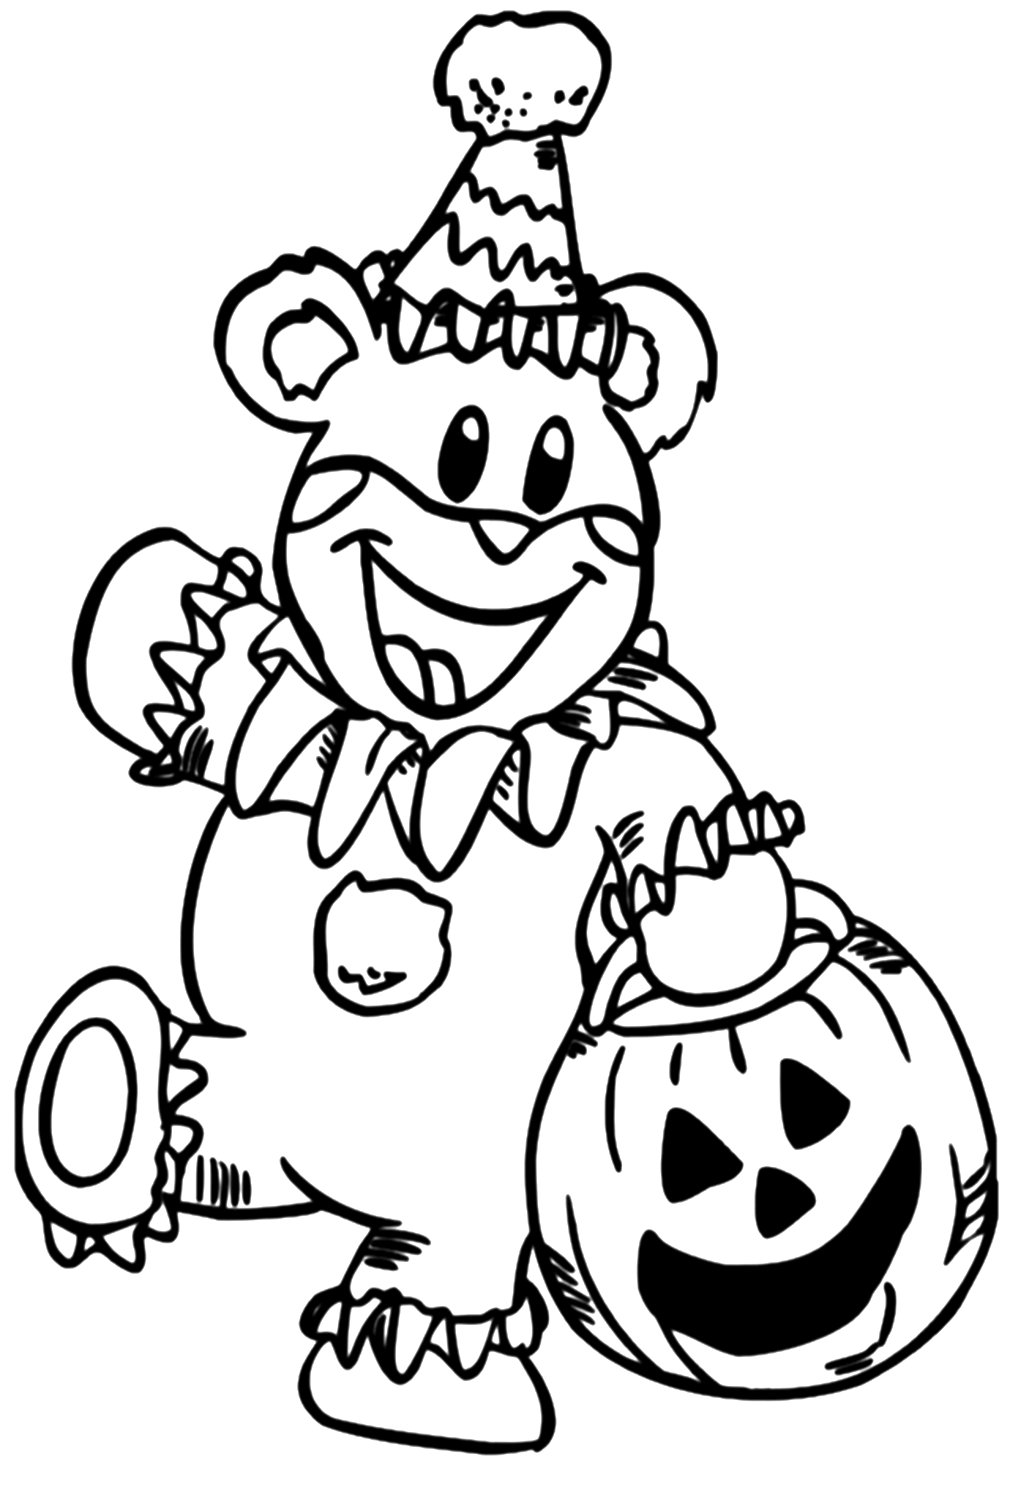 Teddy Bear With Halloween Pumpkin Coloring Page